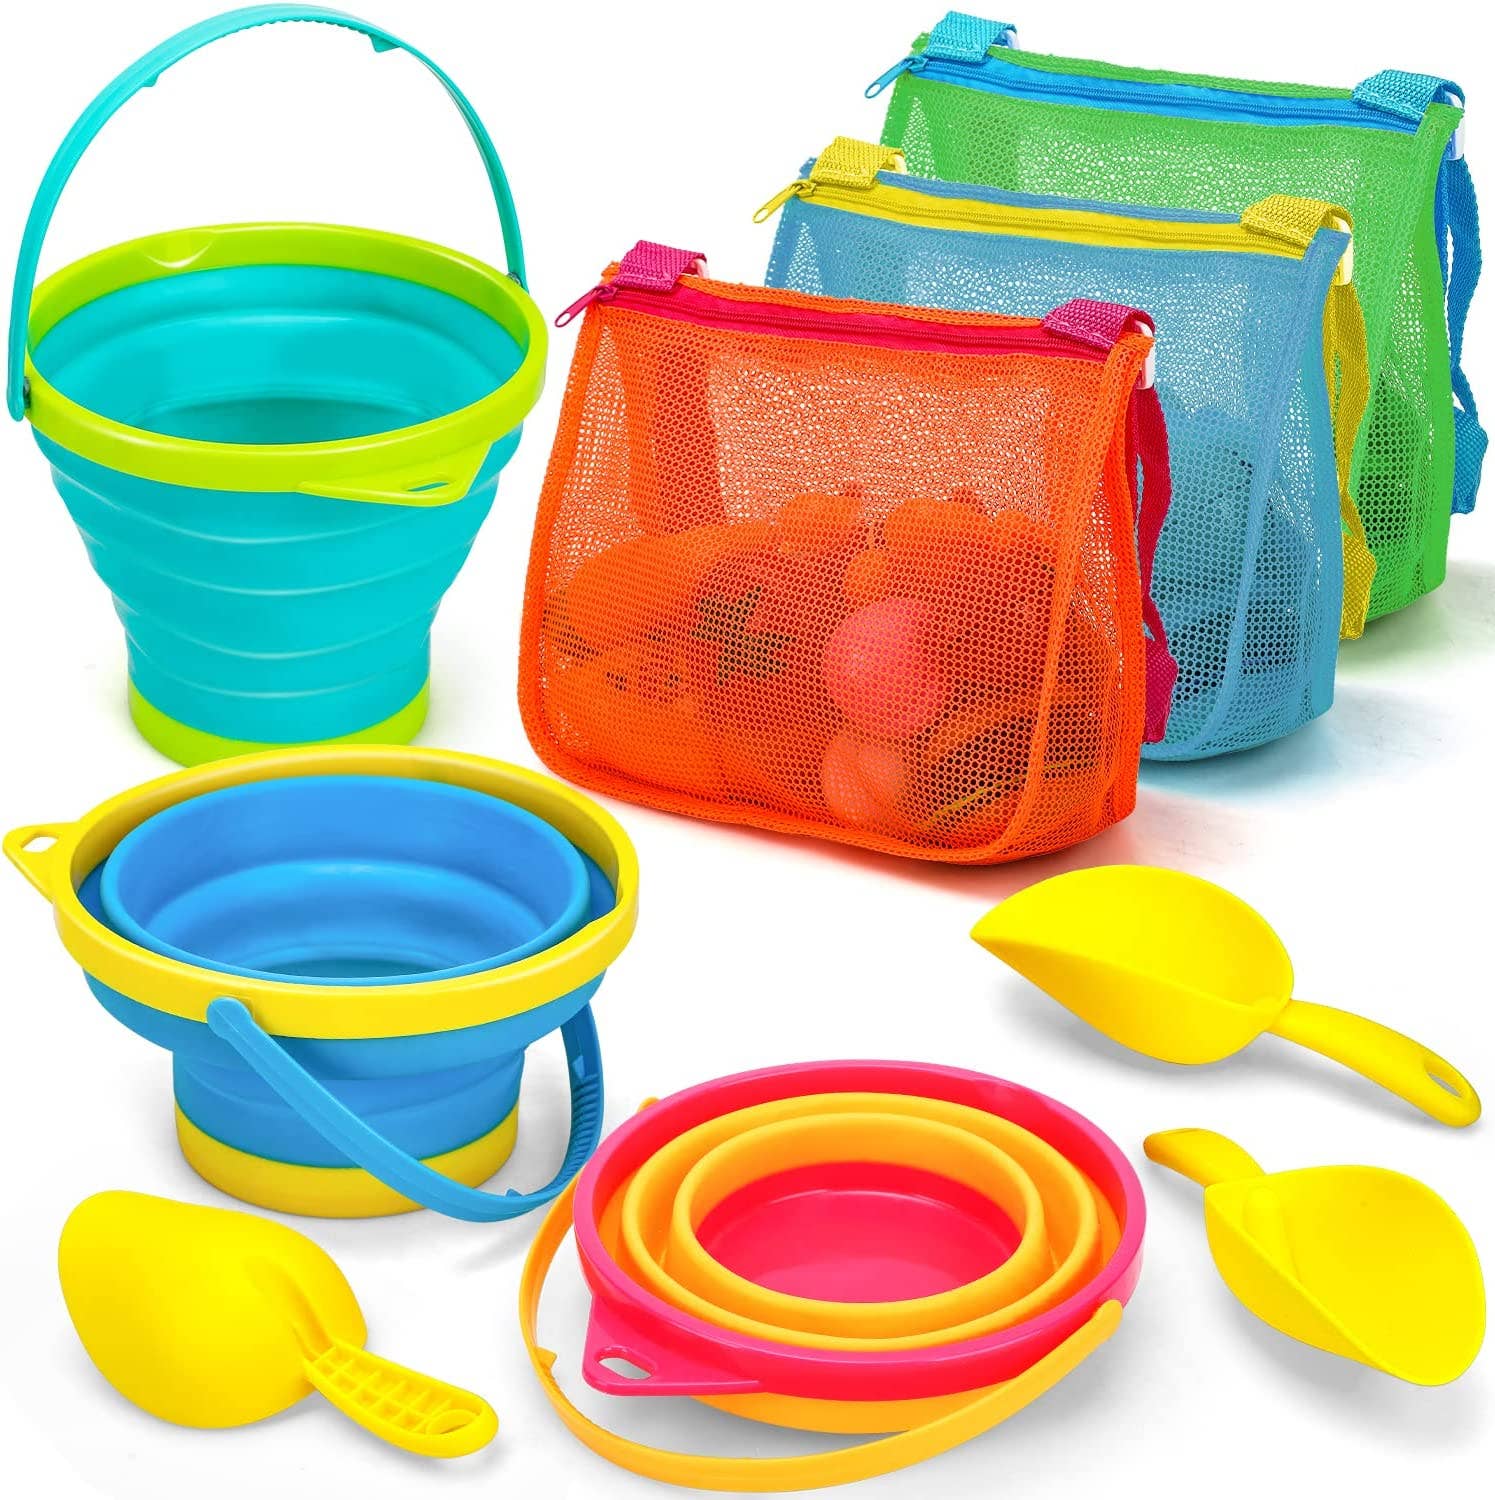 Collapsible Beach Toys for Kid Toddler - Assorted Colors